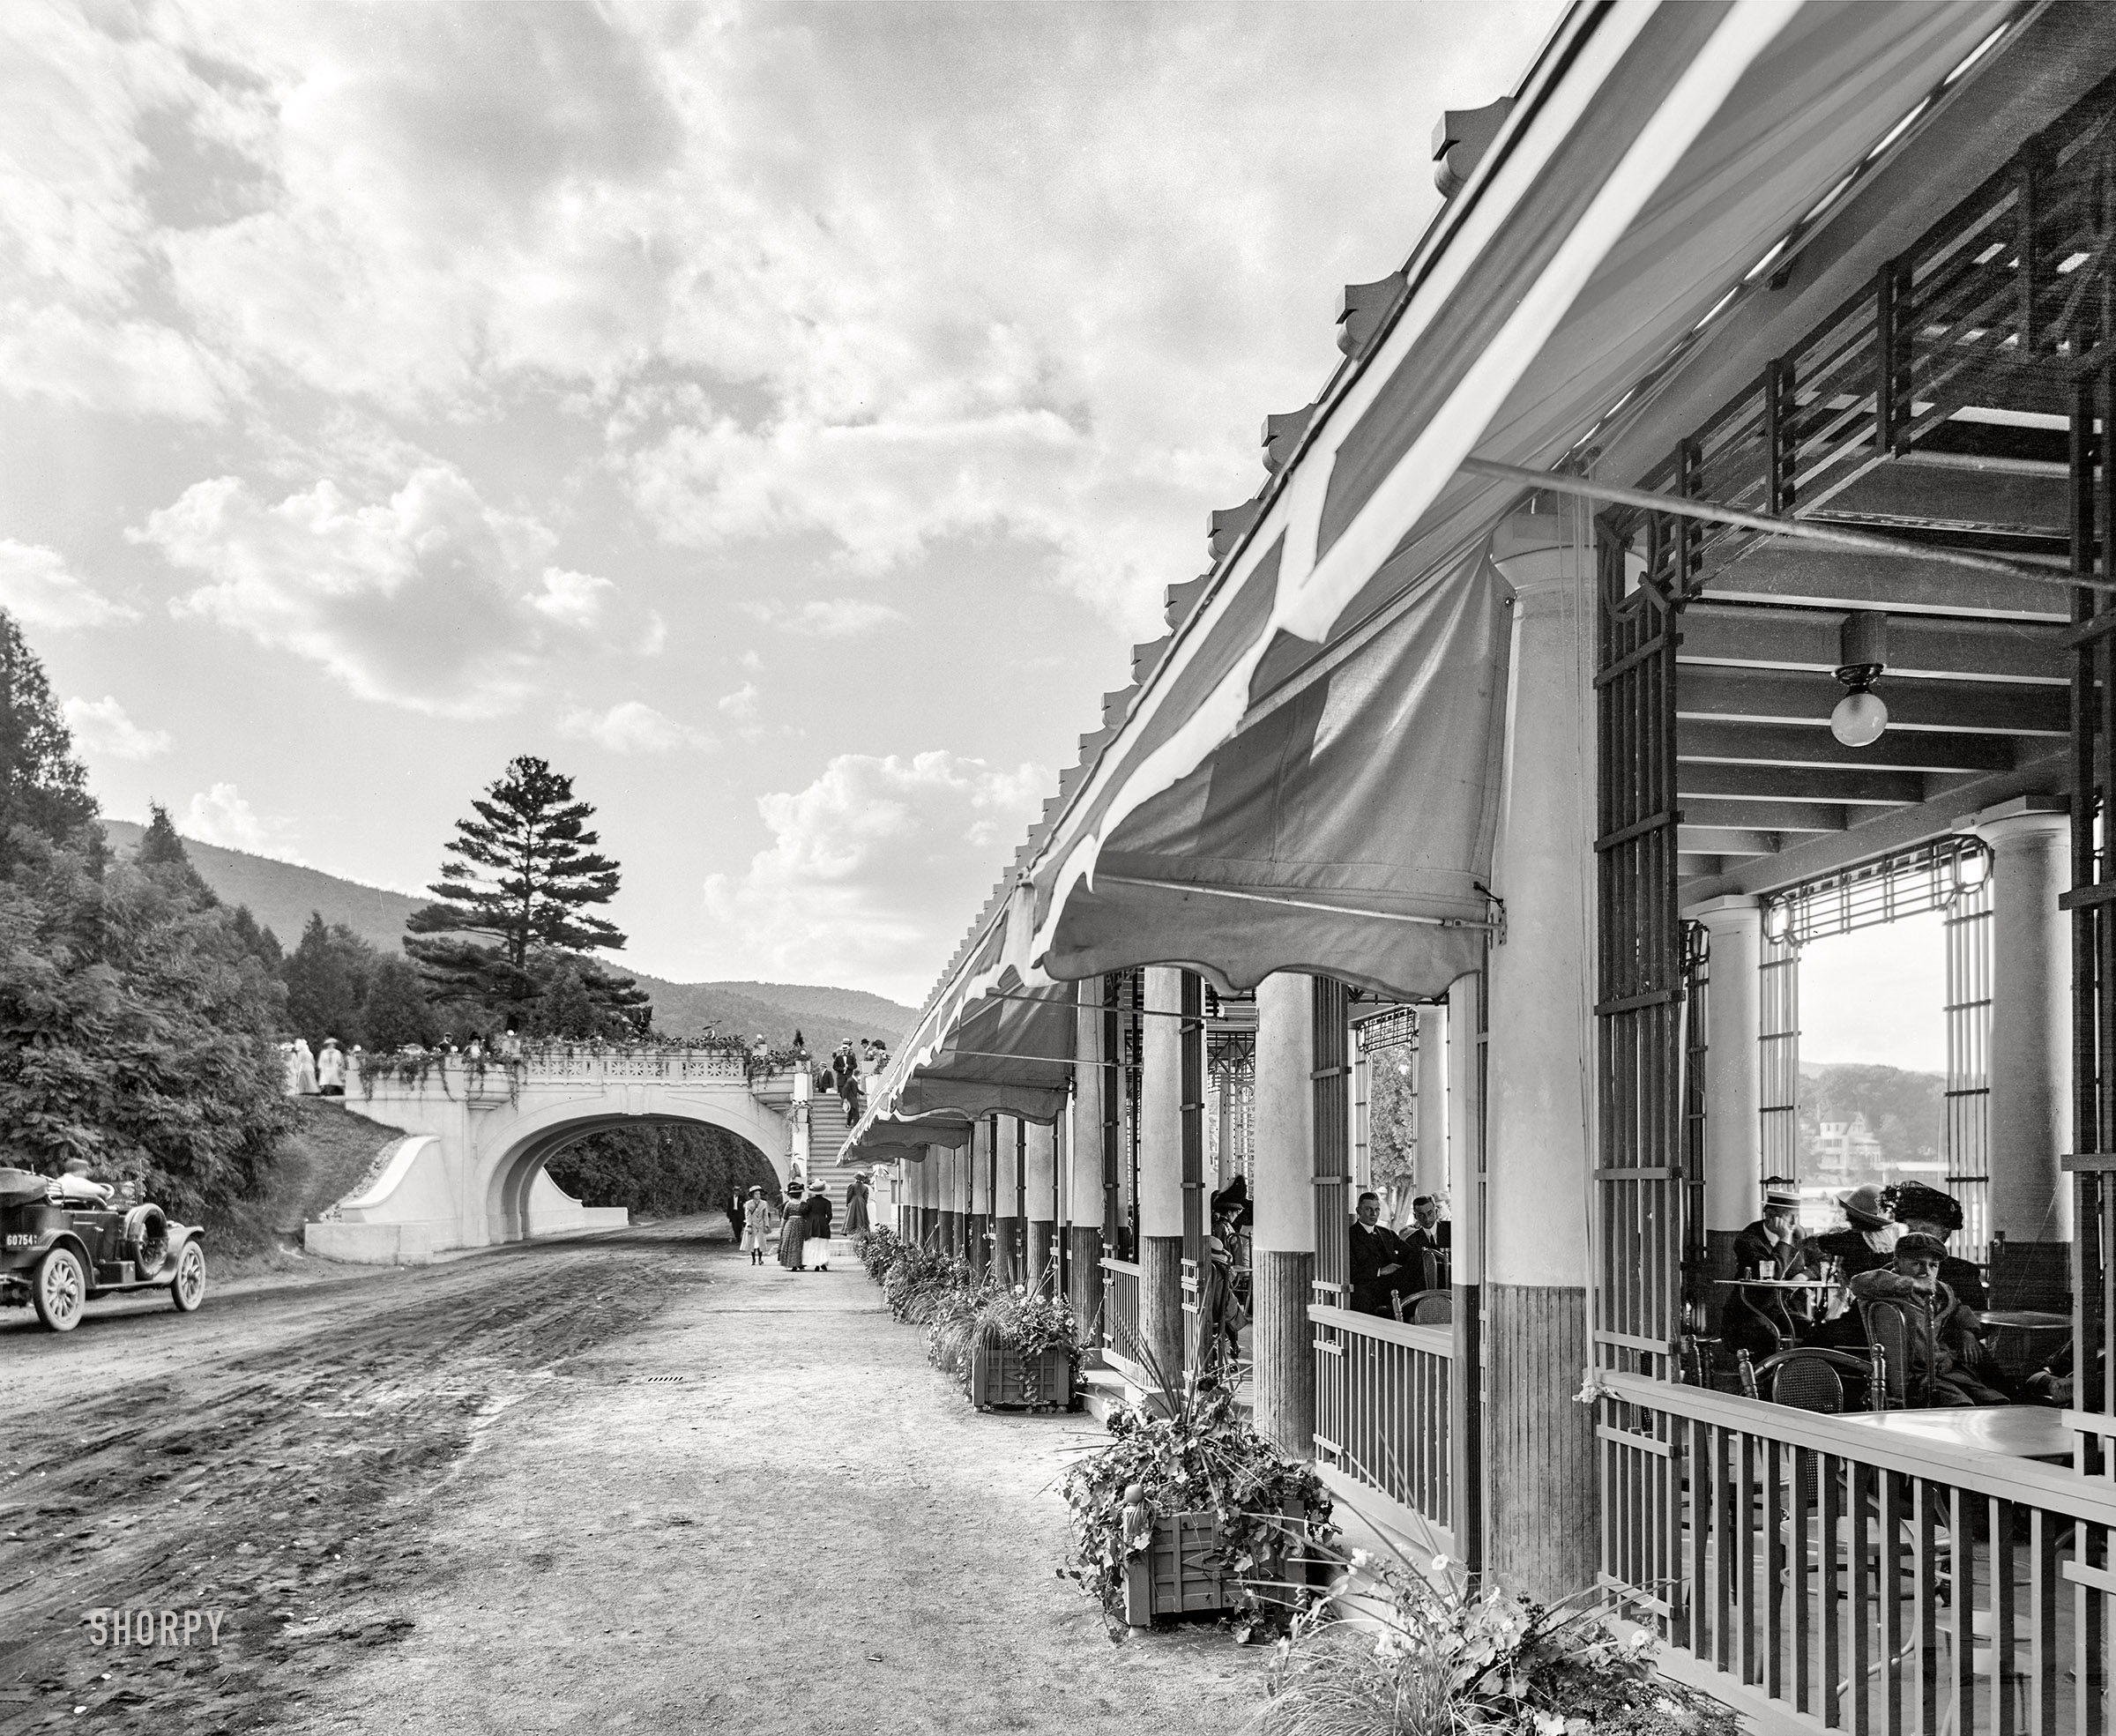 Lake George, New York, circa 1911. "The Pergola-Casino, Fort William Henry Hotel." Two years après-feu. 8x10 inch dry plate glass negative, Detroit Publishing Company. View full size.